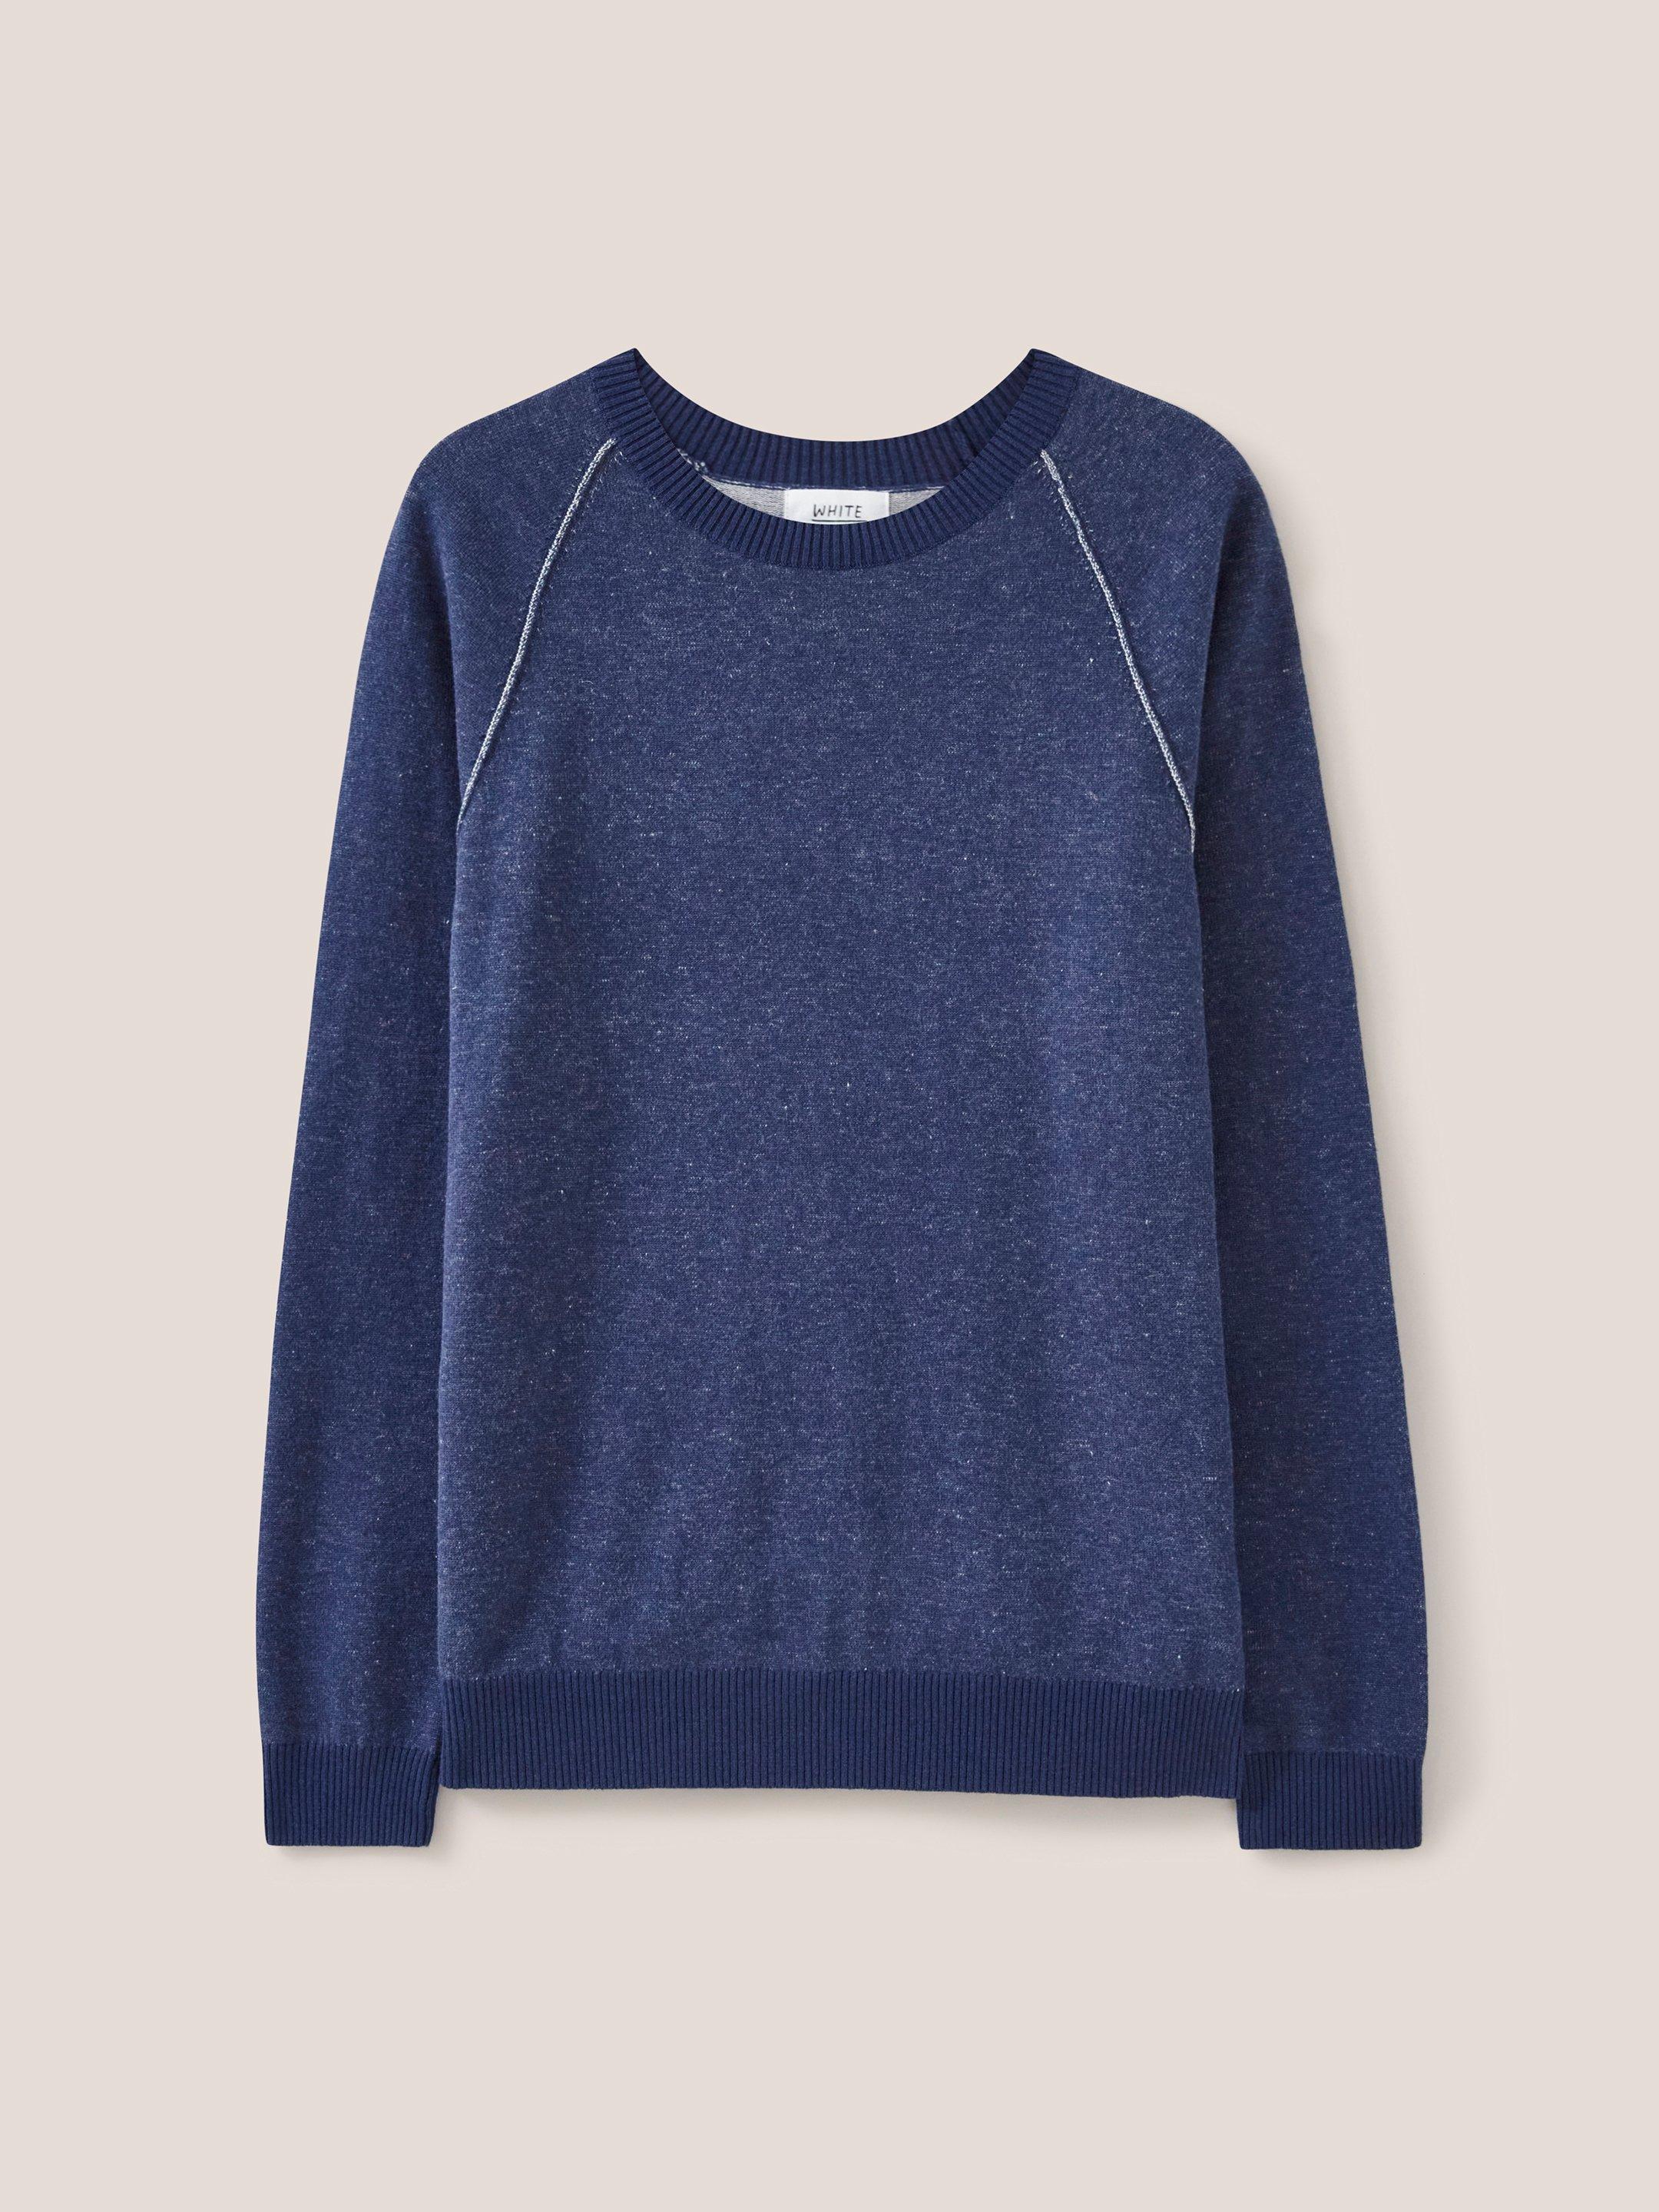 Plated Crew in INDIGO BLE - FLAT FRONT